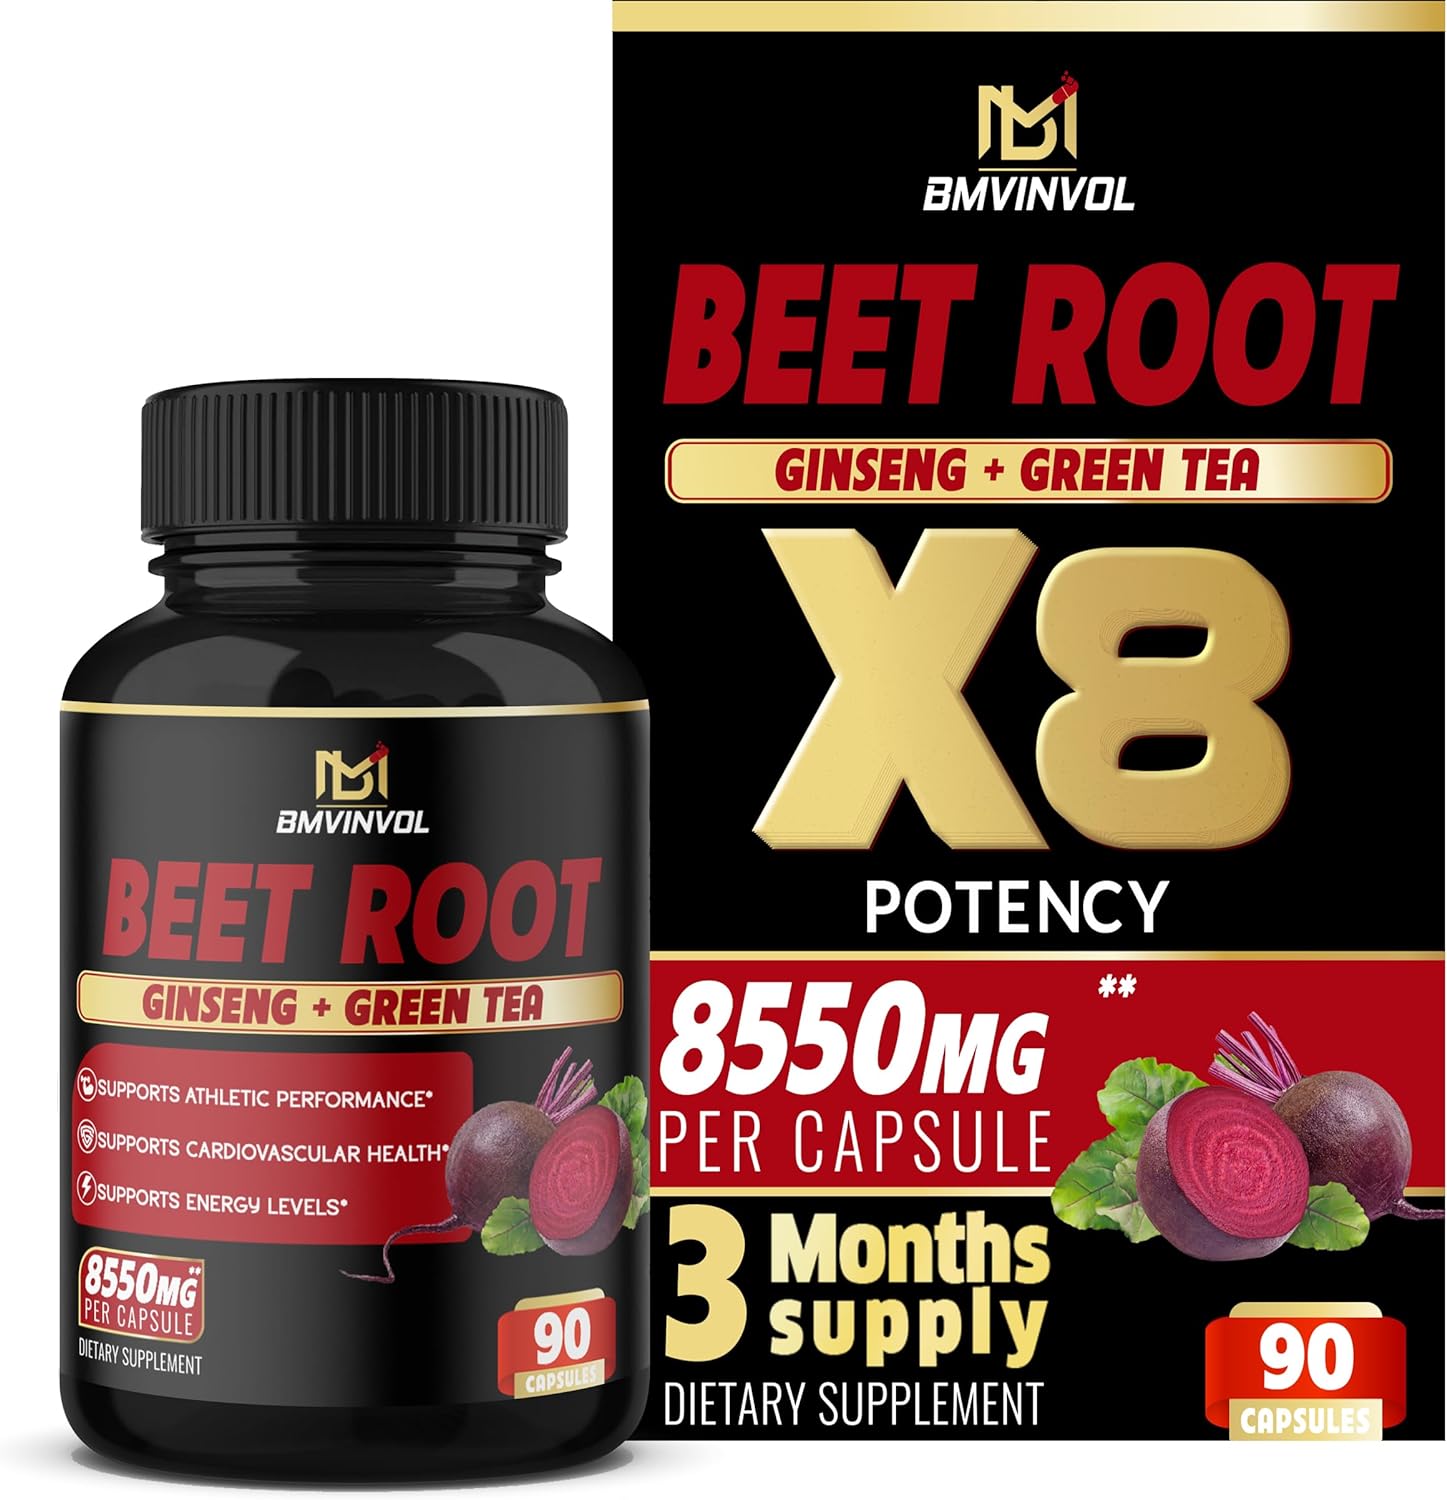 BMVINVOL Beet Root Extract Capsules 8550mg - Green Tea, Red Spinach, Ginseng - Supports Athletic Performance, Digestive, Immune System - 3 Months Supply